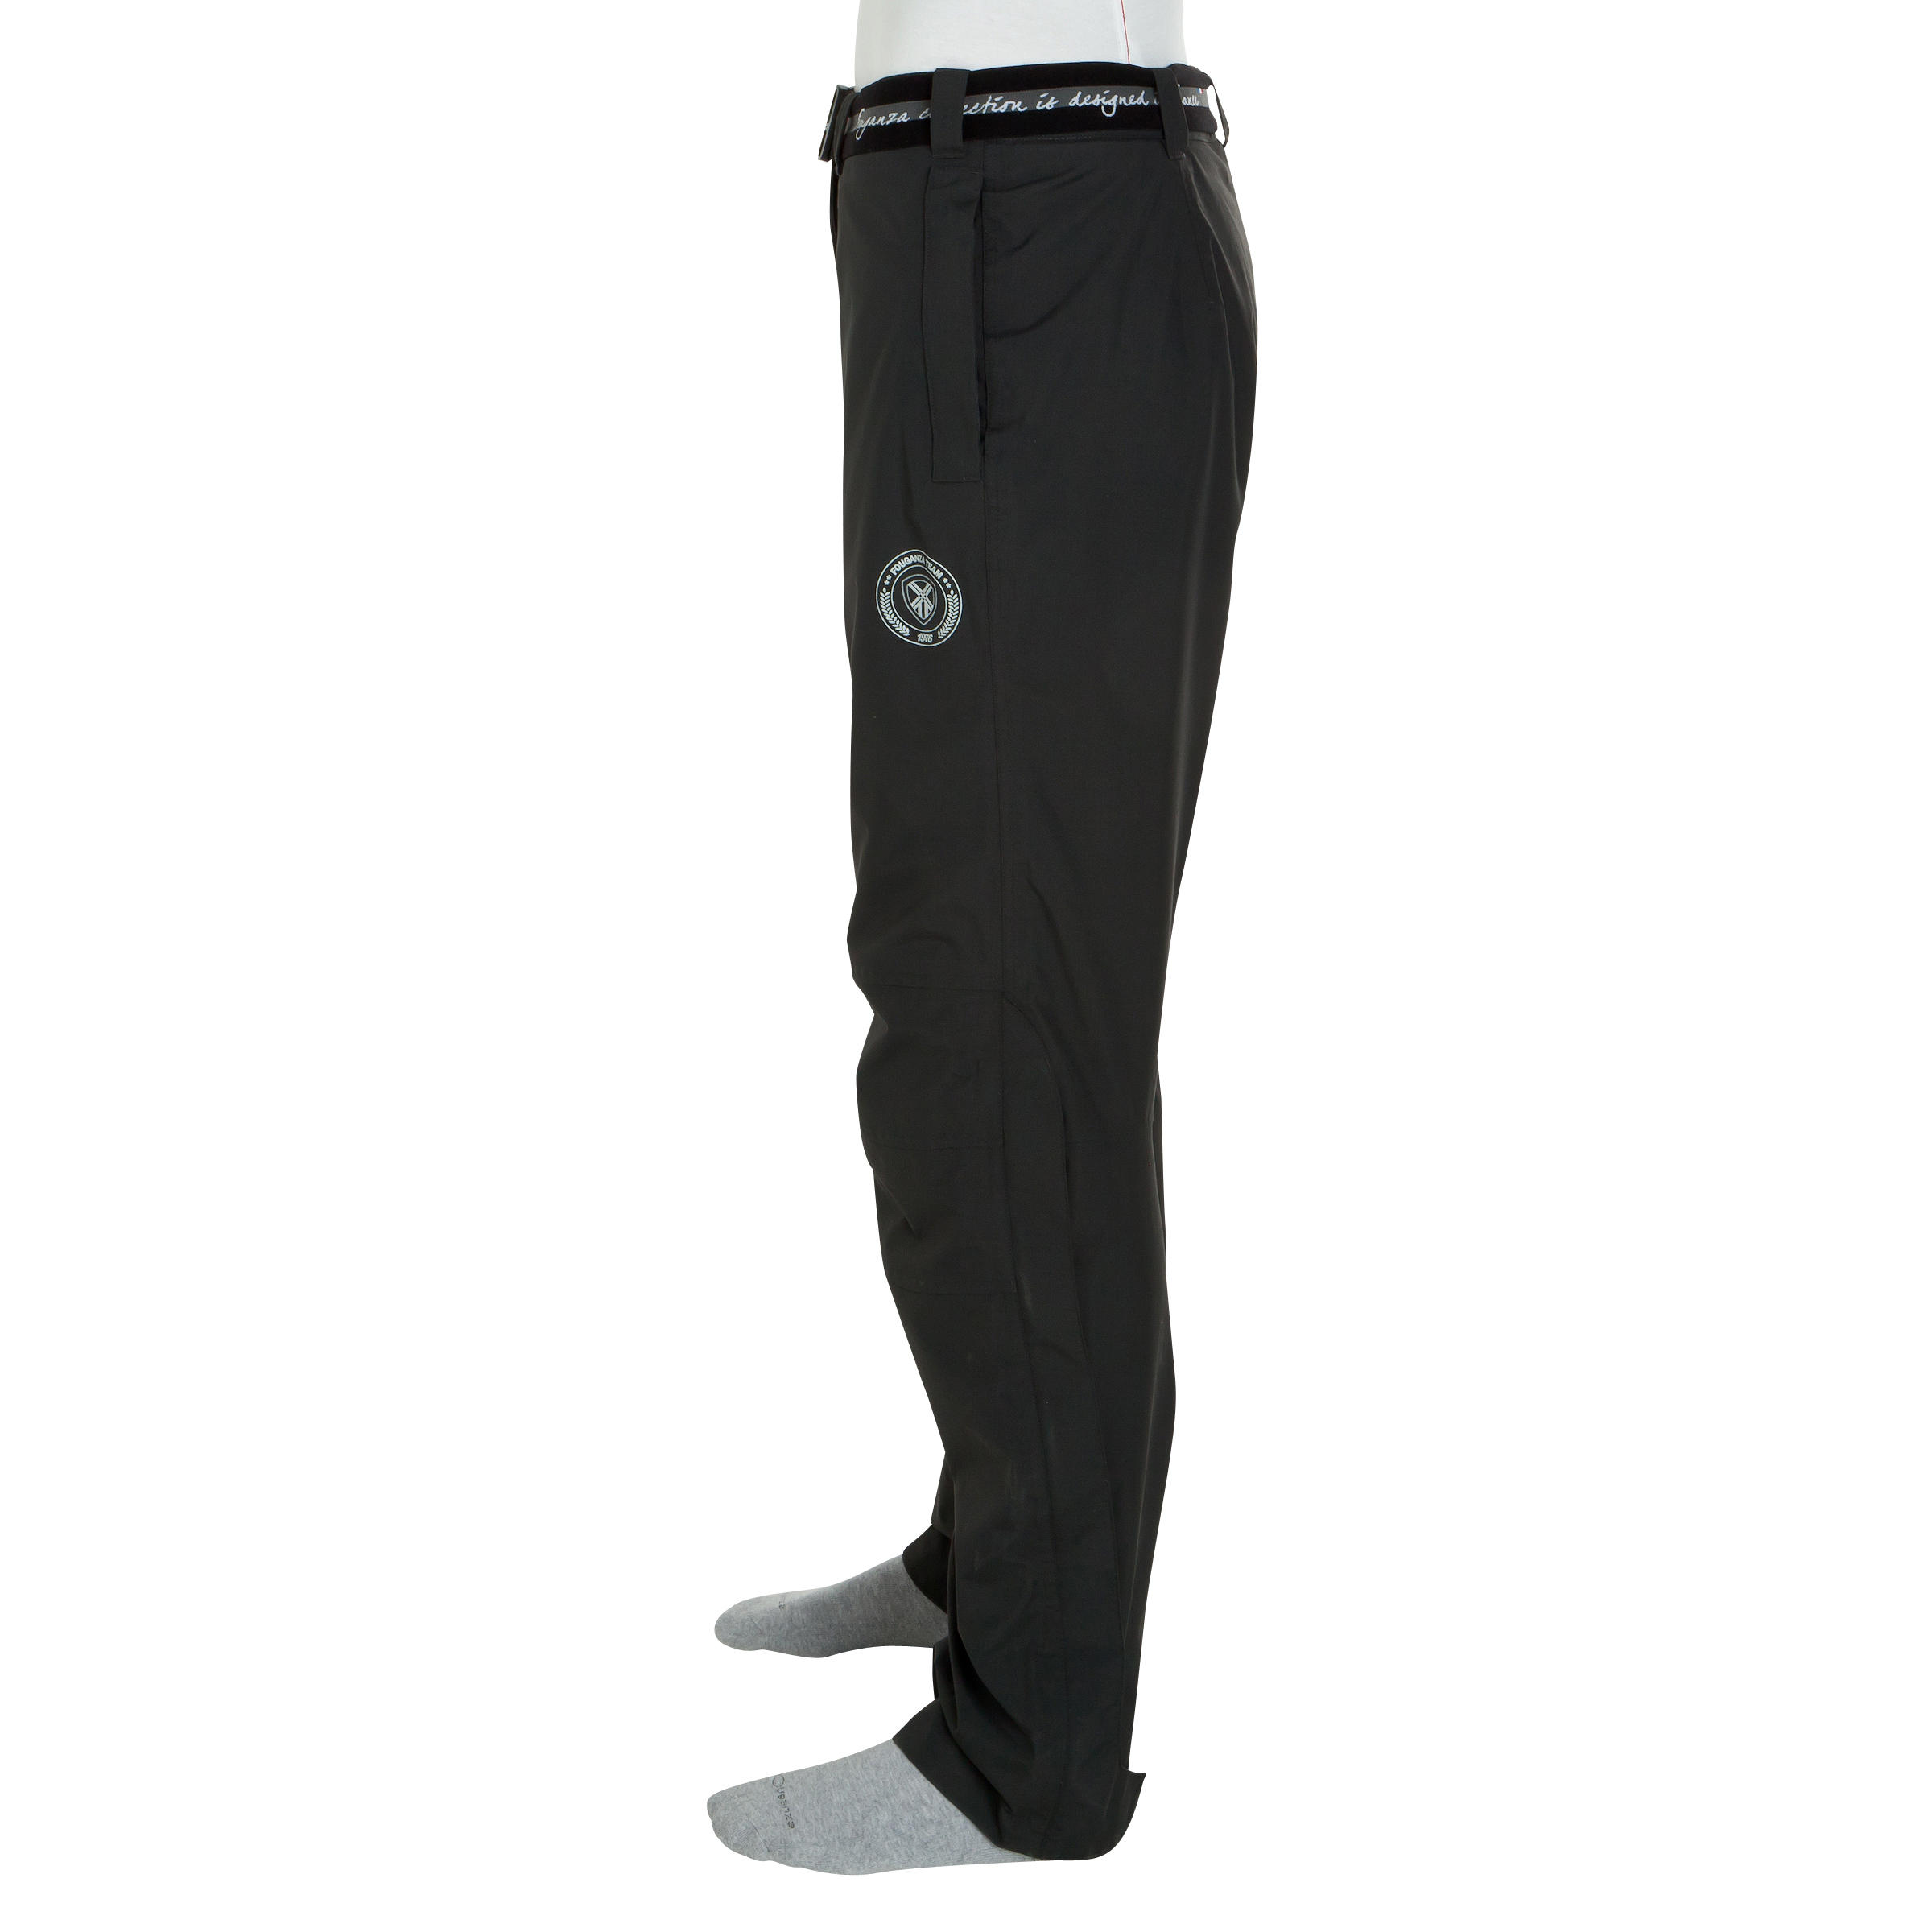 500 Adult 2-in1 Waterproof Horse Riding Overtrousers - Black 3/14